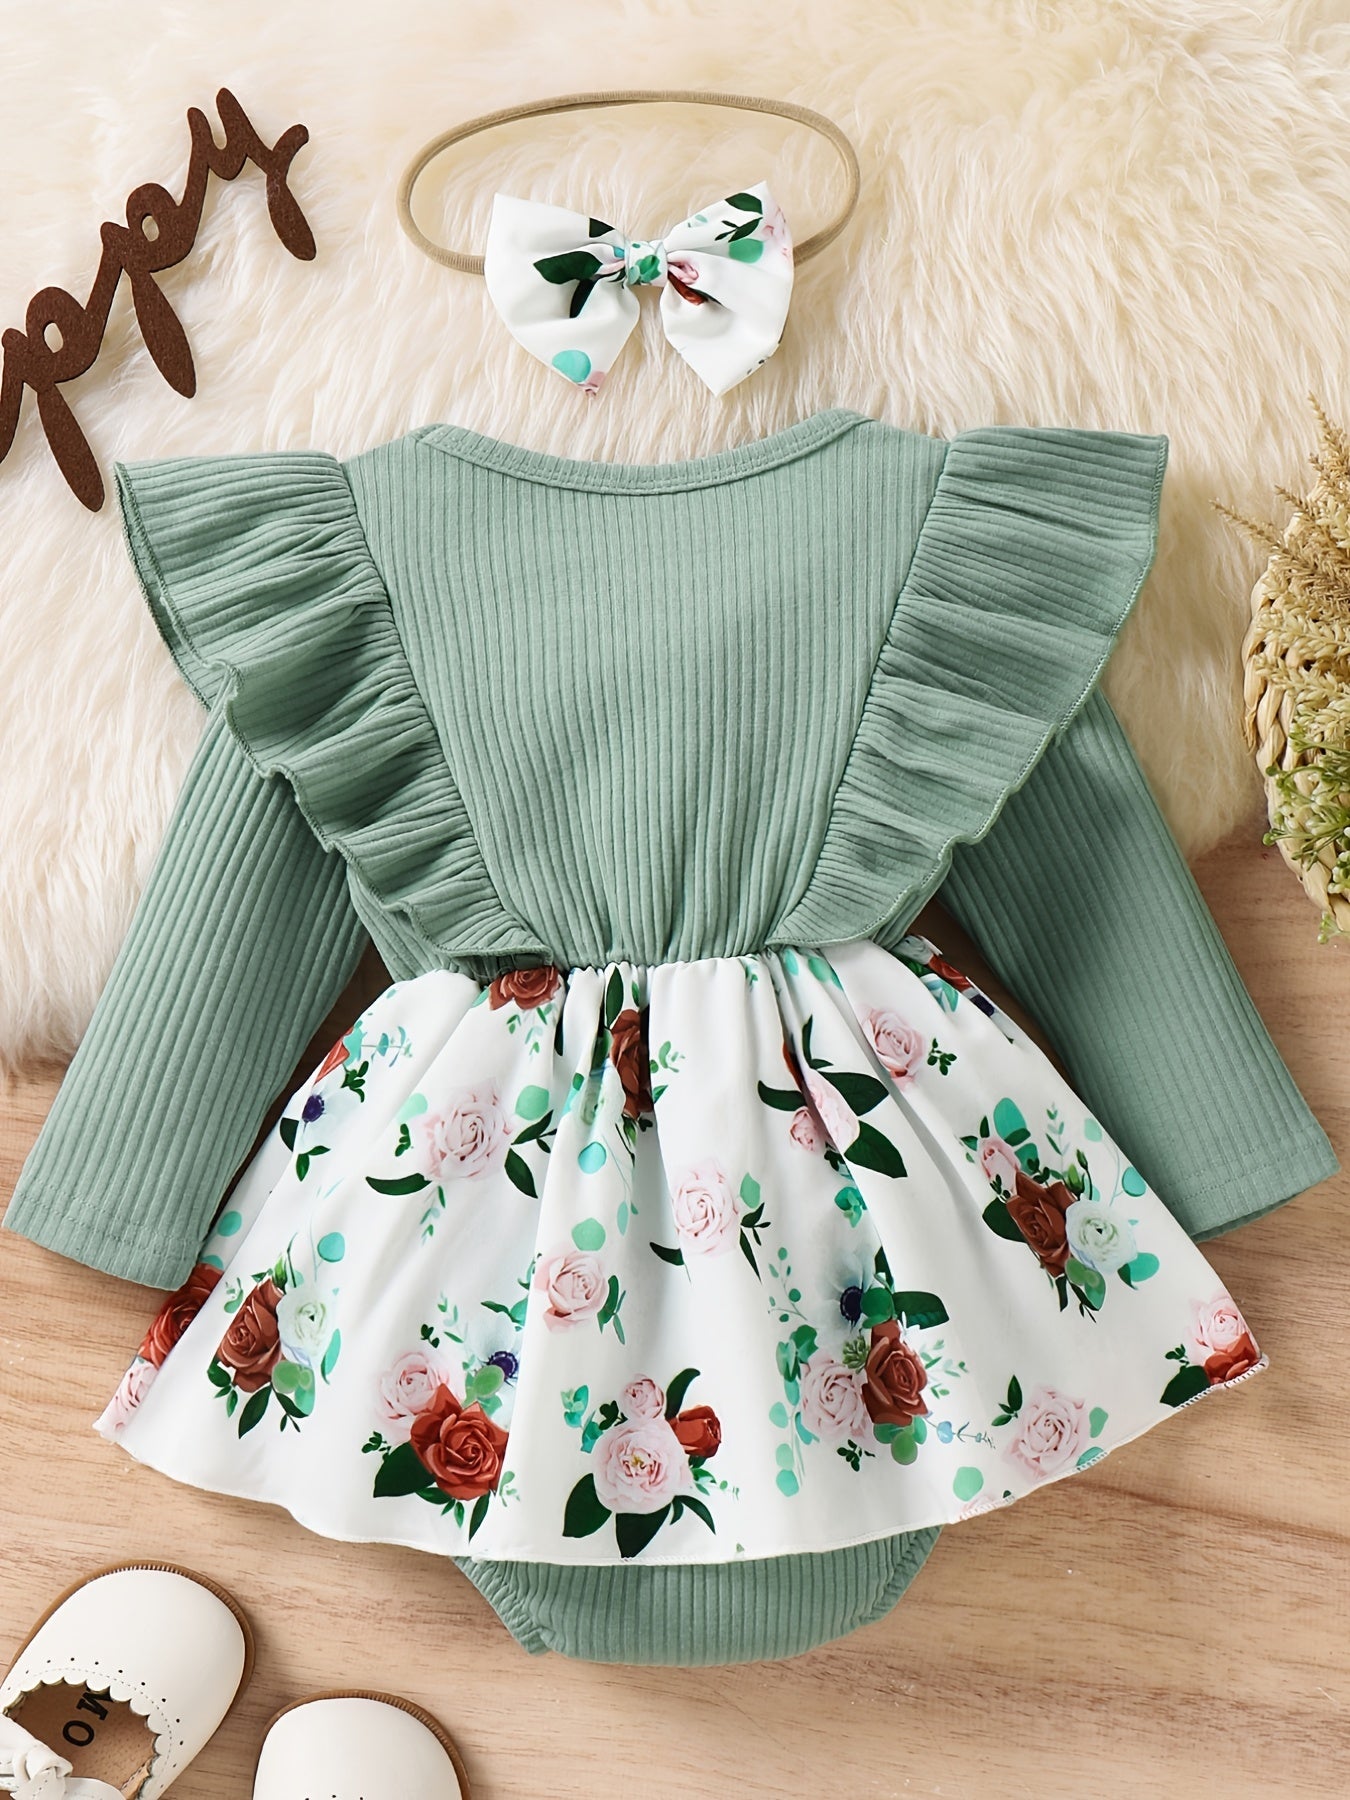 Newborn Infant Baby Girls Plaid Floral Dress Outfit